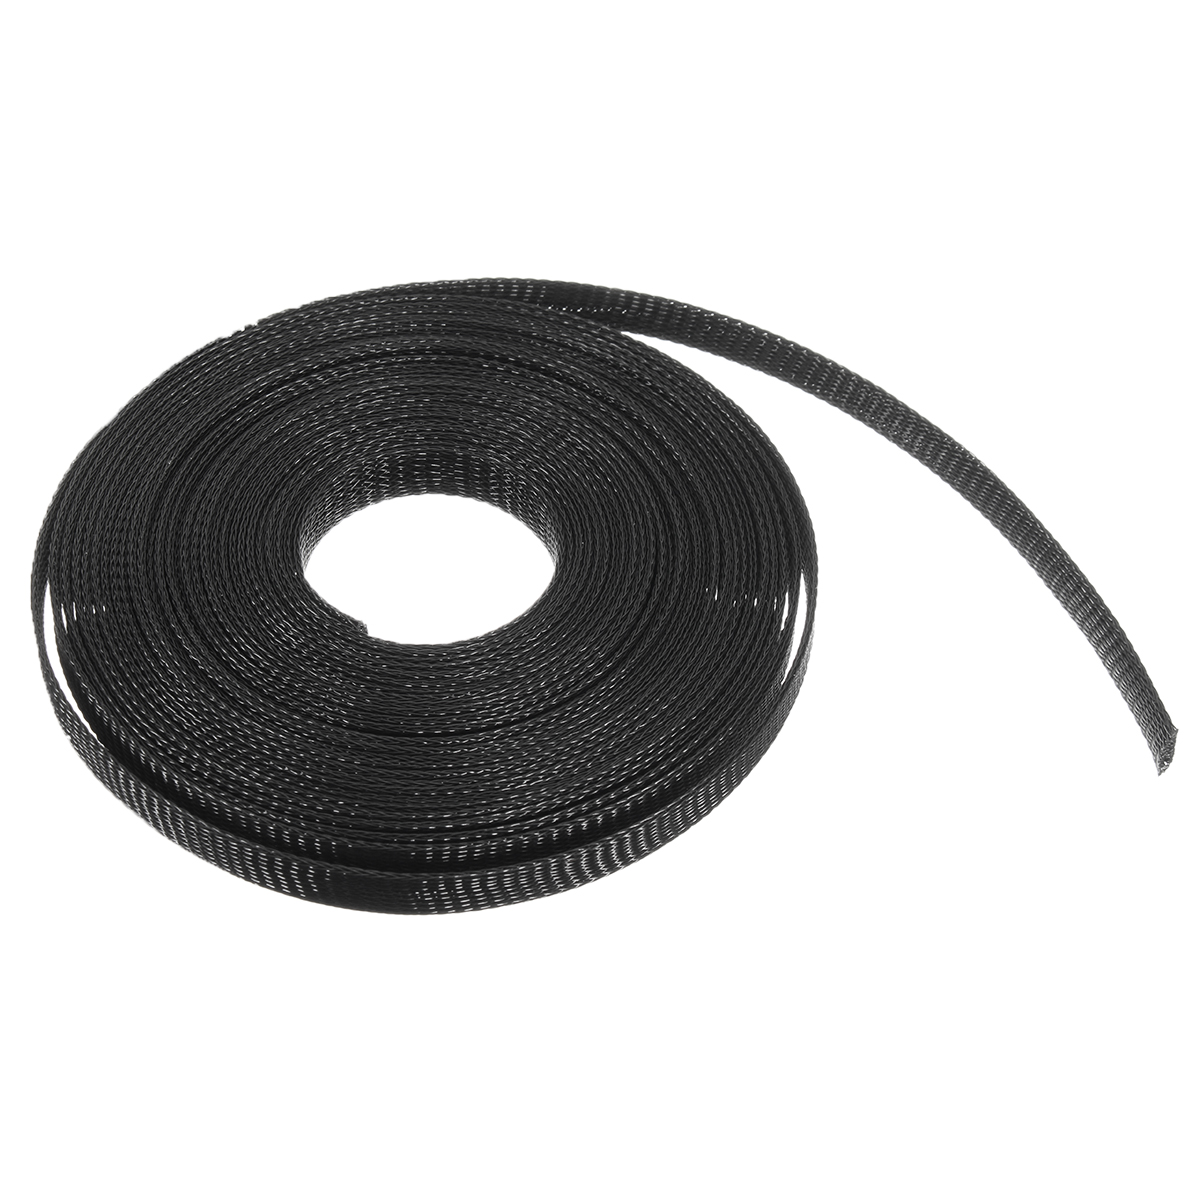 6m-8mm10mm12mm15mm20mm-Wire-Cable-Sheathing-Expandable-Sleeving-Braided-Loom-Tubing-Black-1179628-8